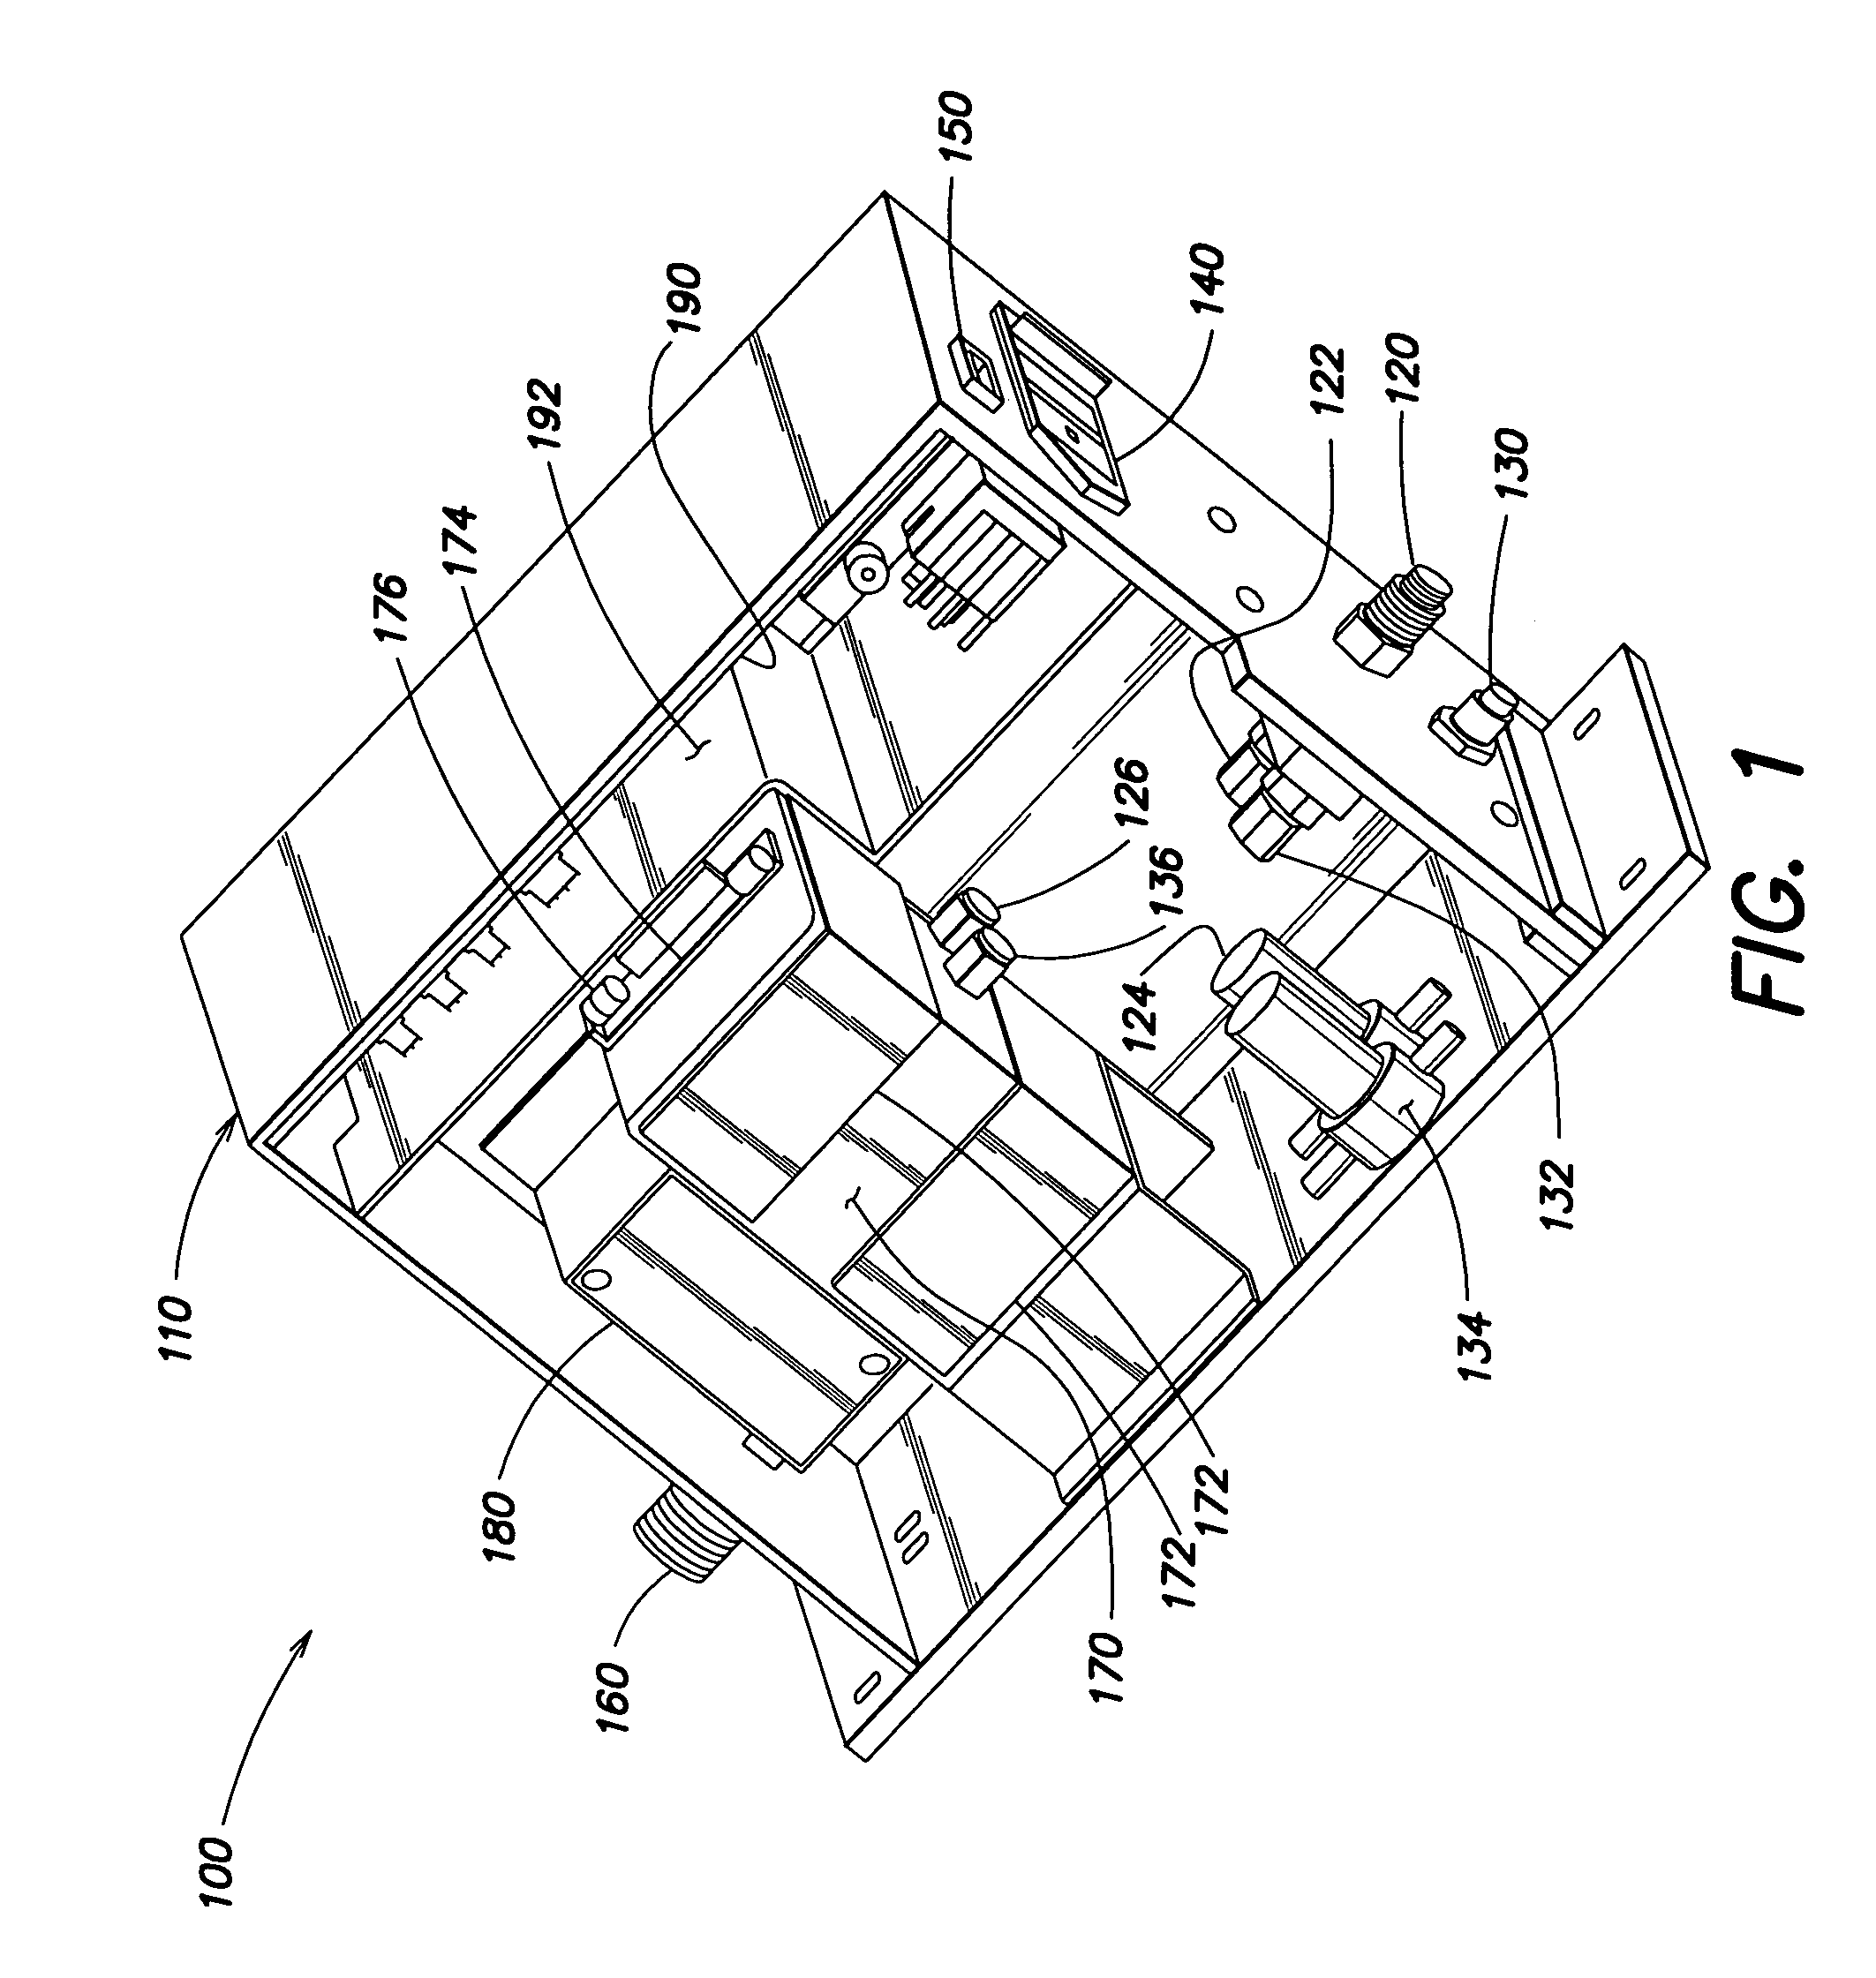 System and method for producing and delivering vapor